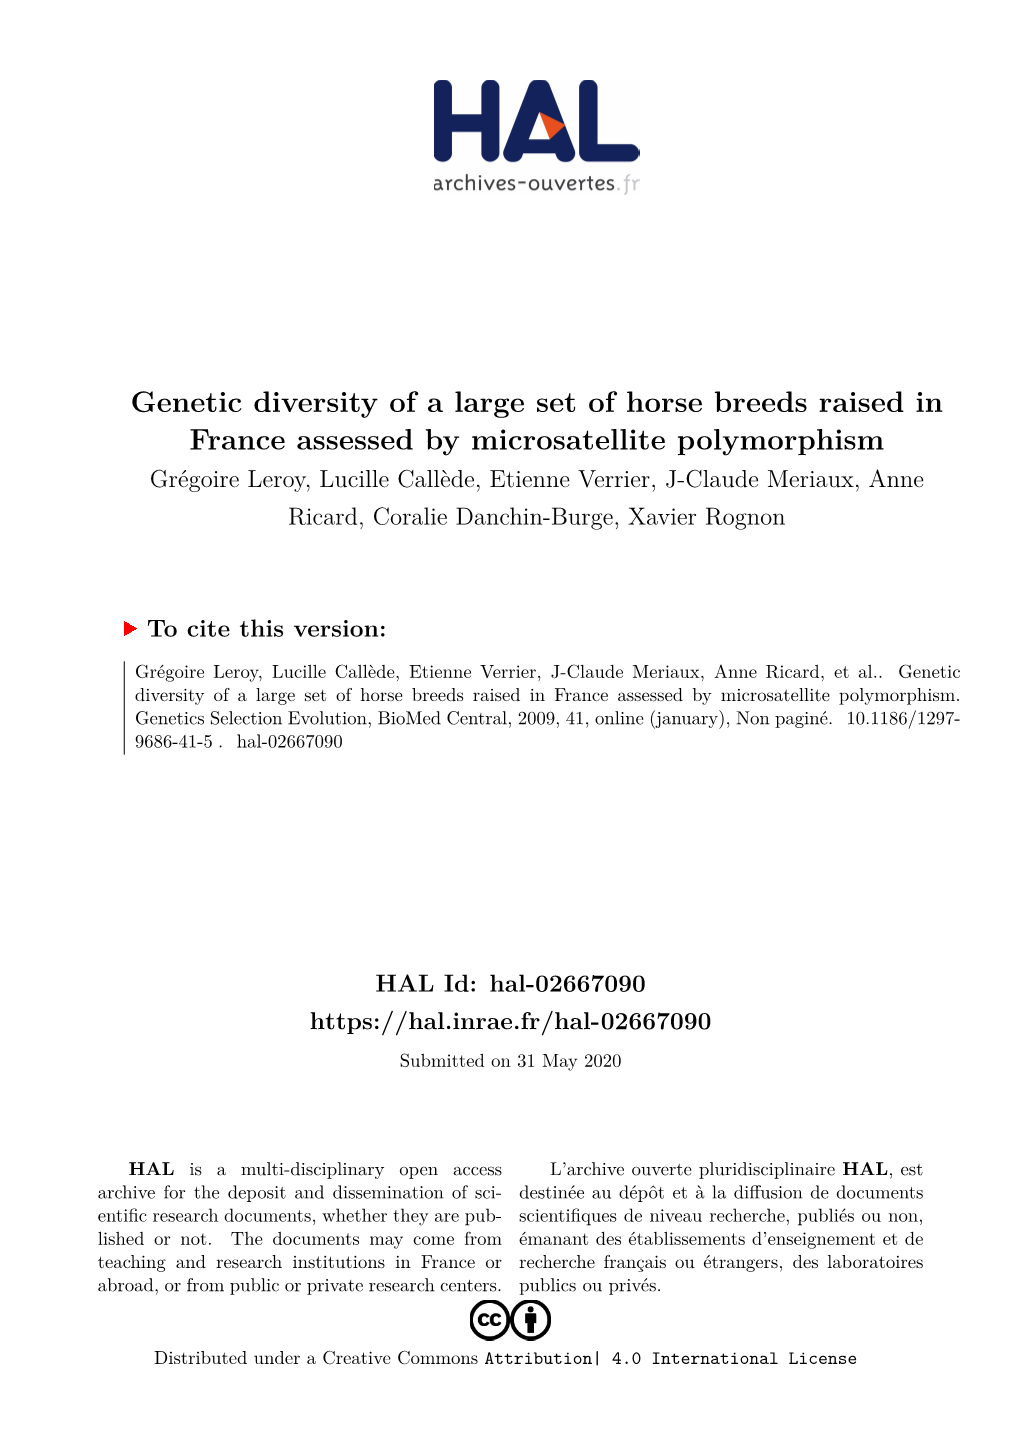 Genetic Diversity of a Large Set of Horse Breeds Raised in France